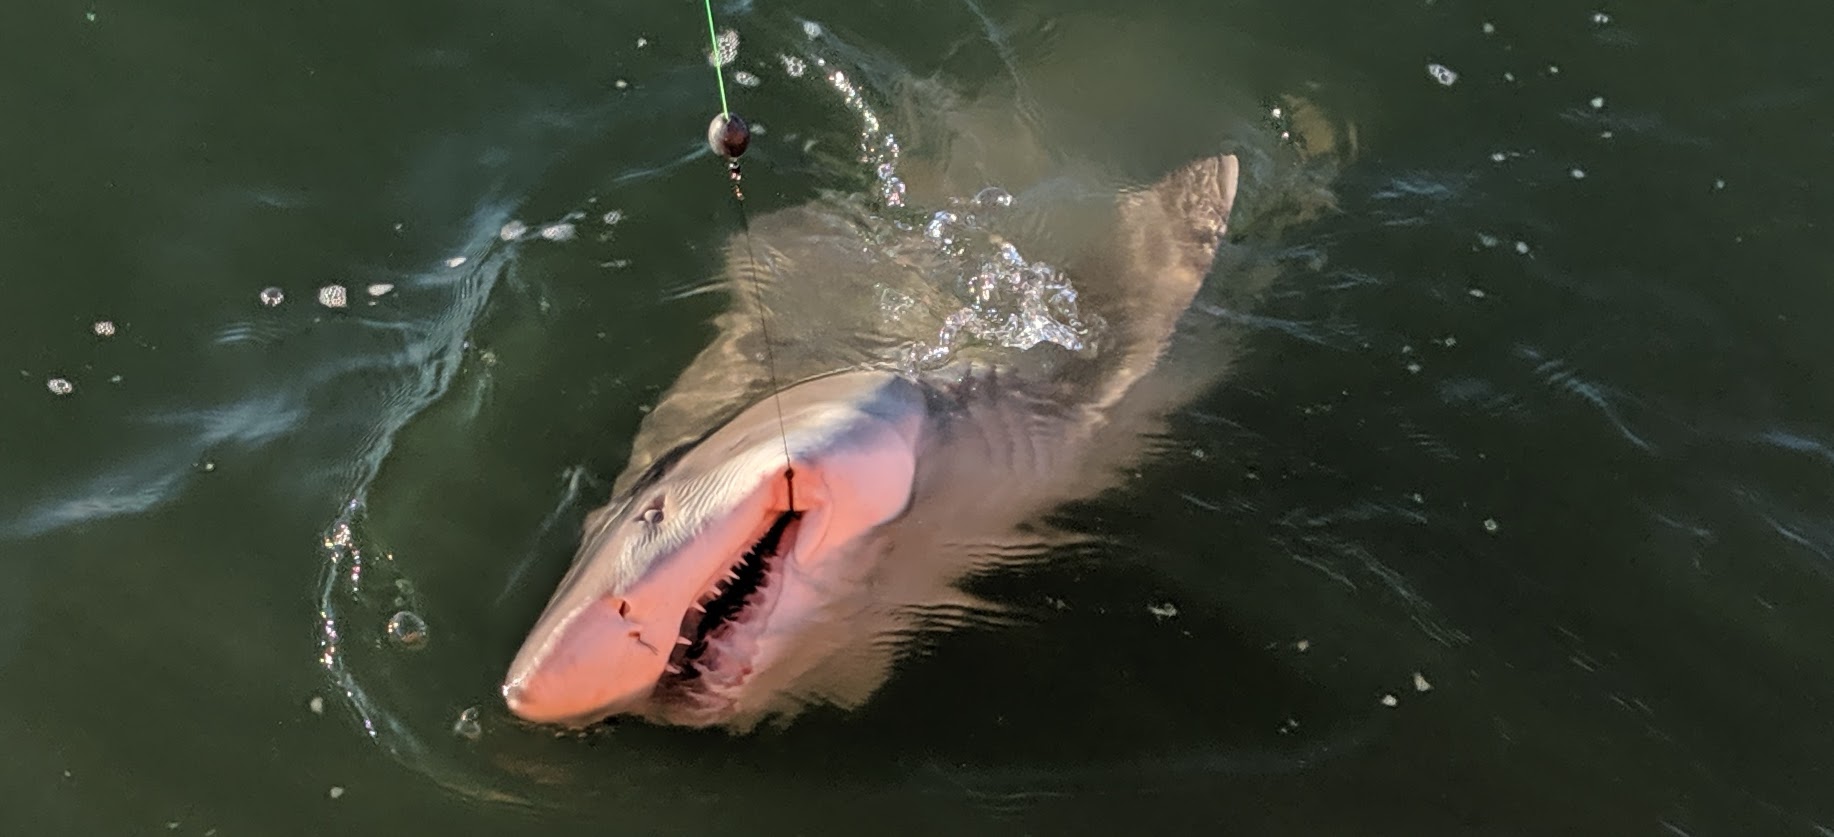 Sharks: Catching these feared fish is more fun than many might think